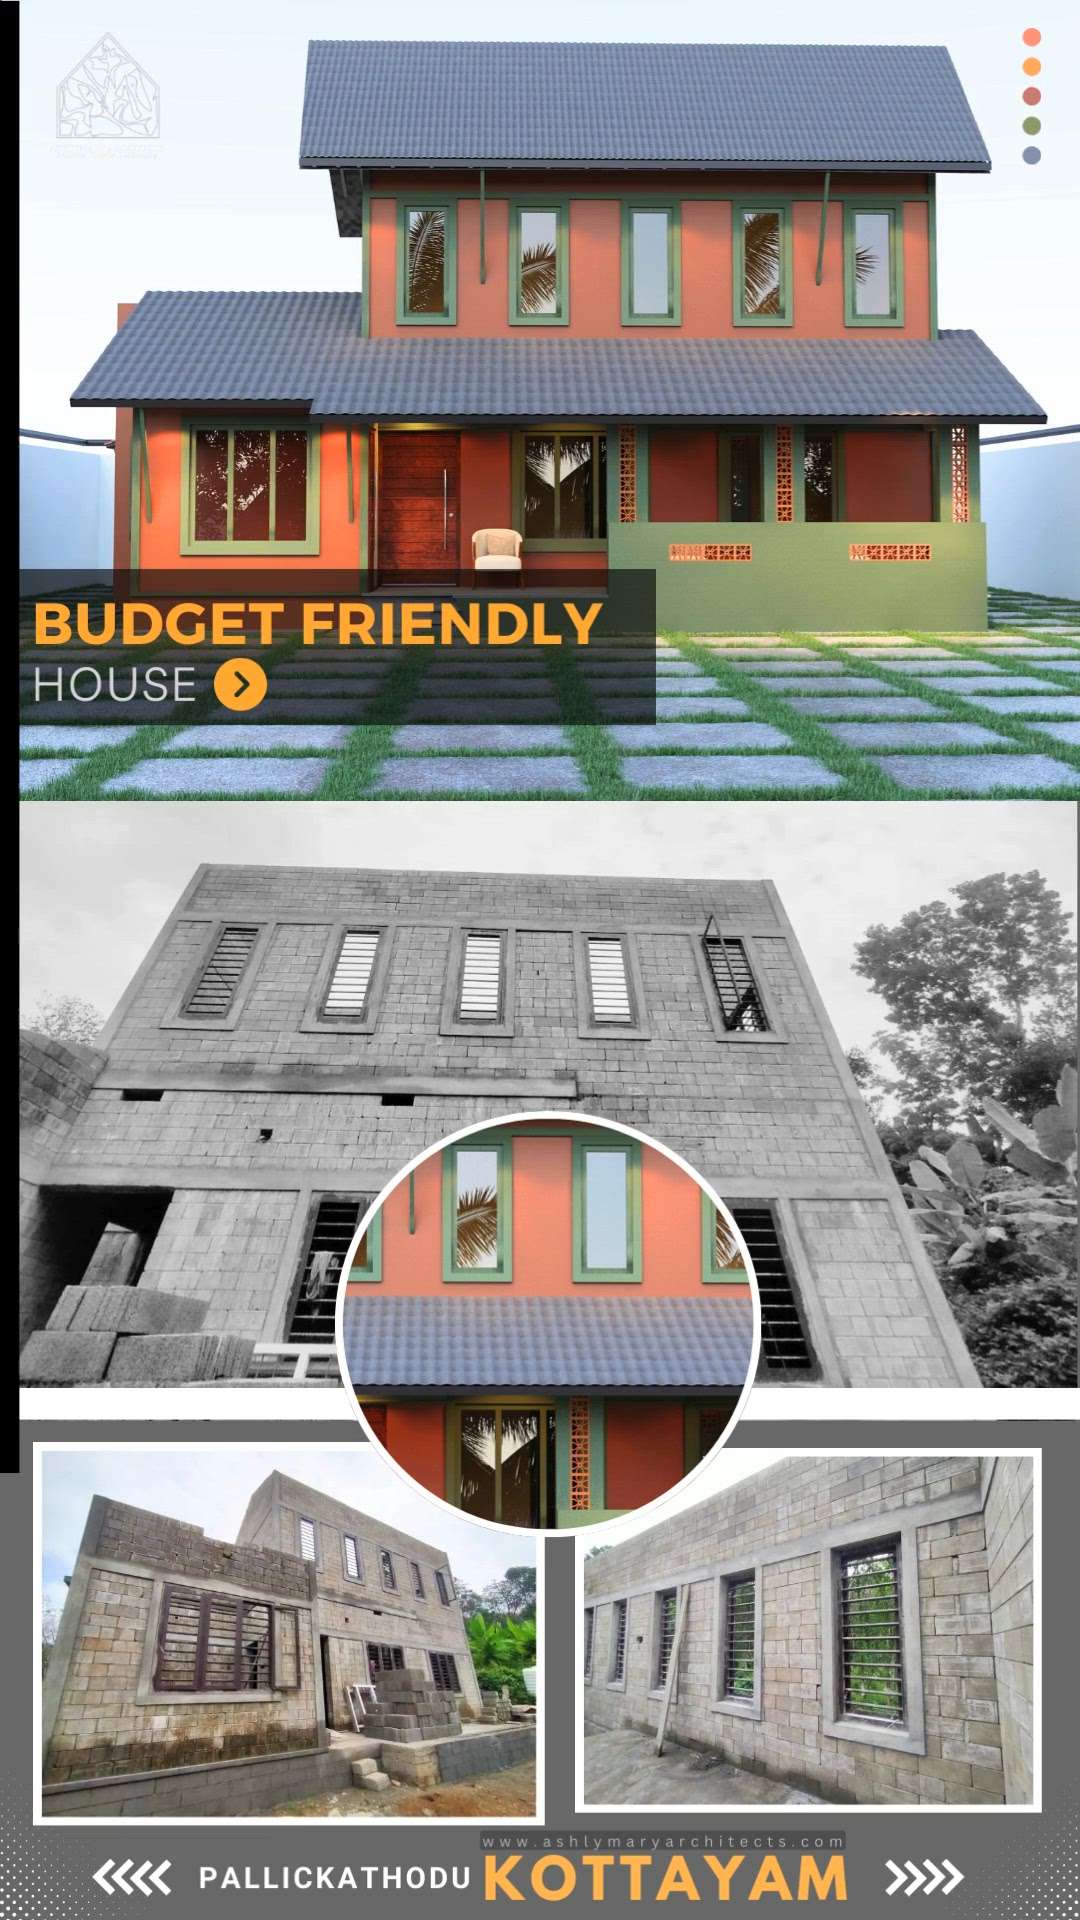 Budget friendly house
Ongoing Project.
Project Location.Pallickathodu.Kottayam.
#Architect  #lowcosthomes #budgethomes #HouseDesigns